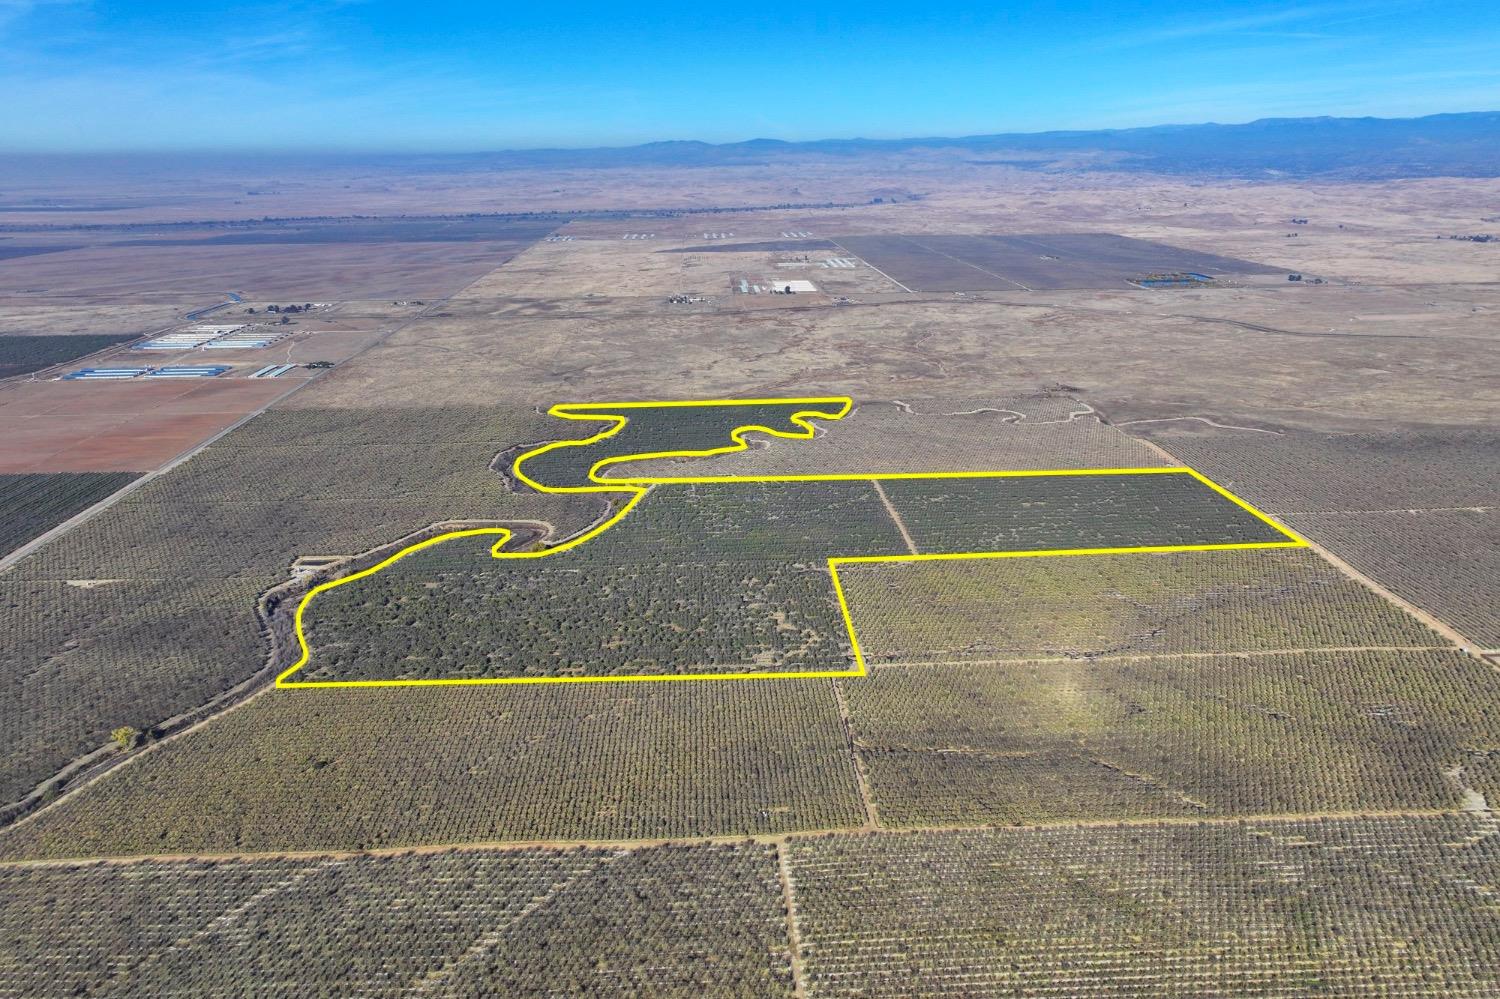 Property is located near the intersection of Road 26 and Avenue 24, east of Chowchilla and north of Madera, CA. Property is fully planted to almonds.Block 825-0: +/-40 acres, planted 2015, 50% Nonpareil, 25% Aldrich, 25% Wood Colony; Block 826-2: +/-40 acres, planted 2014, 50% Nonpareil, 25% Monterey, 25% Wood Colony; Block 826-0: +/-40 acres, planted 2004, 50% Nonpareil, 25% Monterey, 25% Carmel; Block 828-2: +/-40 acres, planted 2002, 50% Butte, 50% Padre. Production records are available upon request. Property is in Madera Irrigation District (Subordinate Lands) and is connected to receive water when available. It is part of Madera Irrigation District GSA.Subject property and several surrounding properties are part of a shared water agreement where any wells, irrigation infrastructure, and costs are shared proportionately among the members. Berenda Creek and a tributary creek flow through the property. Sustainable Groundwater Management Act (SGMA) requires groundwater basins to be sustainable by 2040. SGMA requires a Groundwater Sustainability Plan (GSP) by 2020. Said plans may limit ground water pumping. For more information please visit the SGMA website.Property is professionally farmed with the potential for management willing to stay on board if desired.